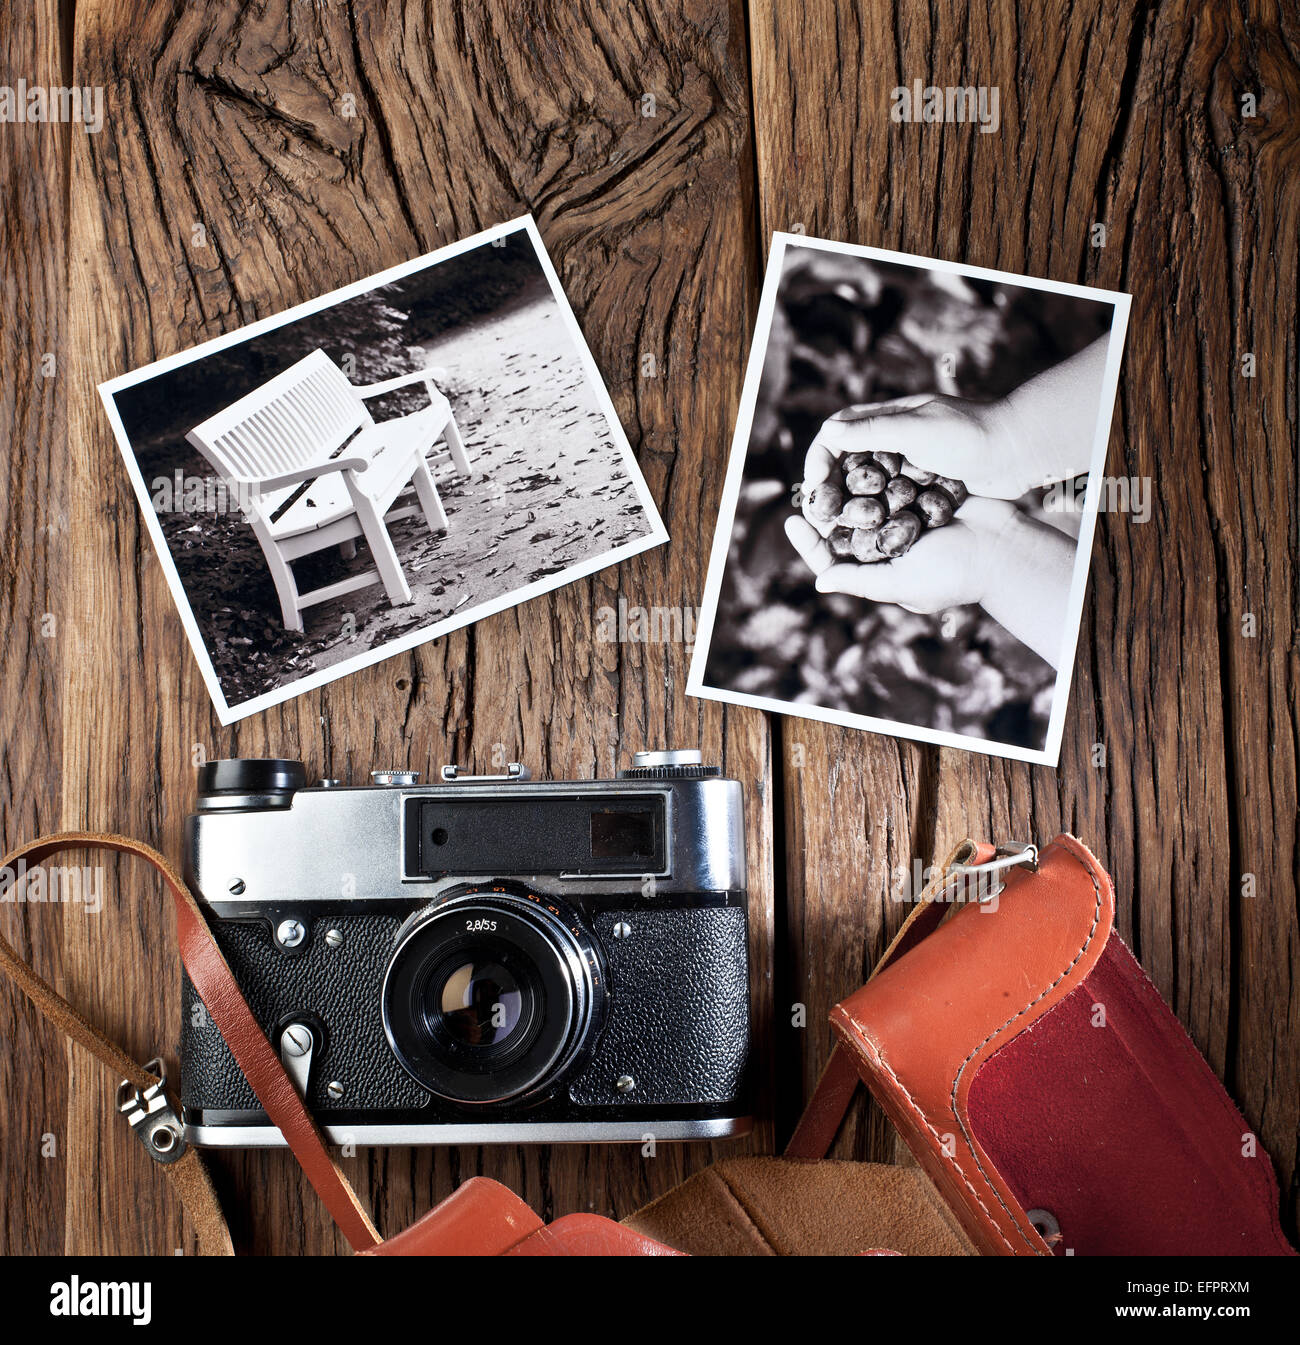 Old rangefinder camera and black-and-white photos on the old wooden table. Stock Photo